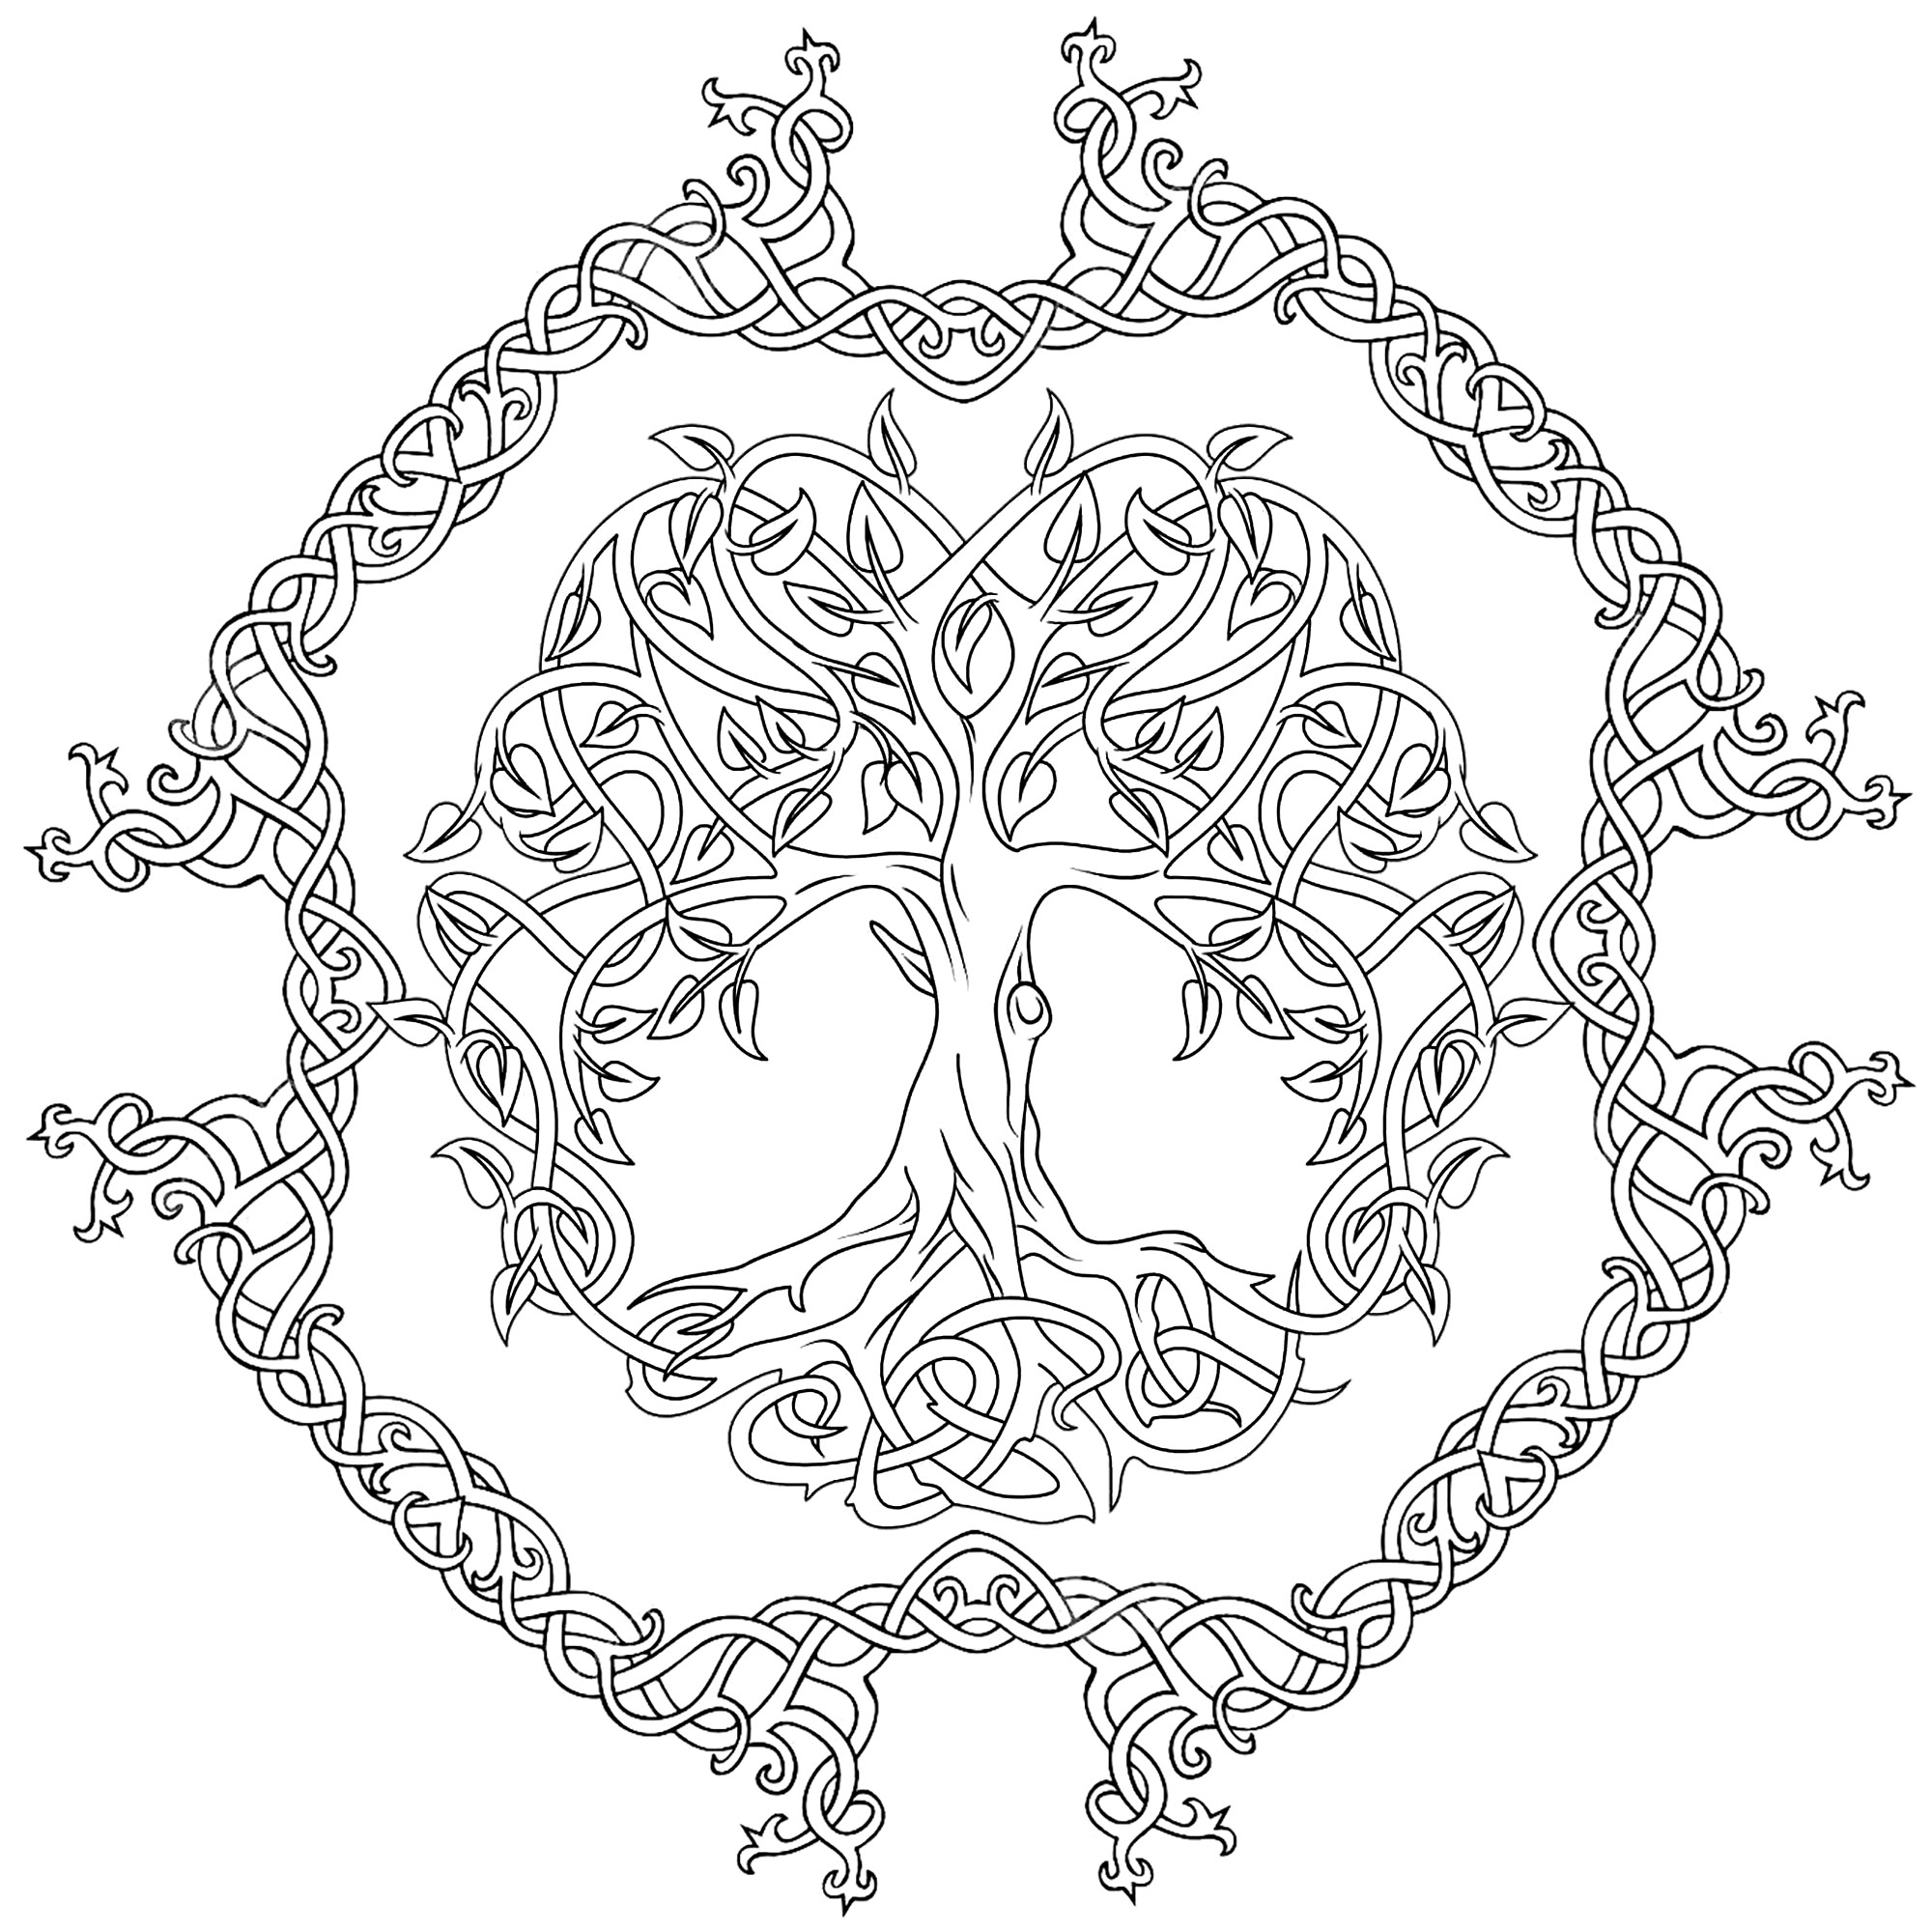 Celtic Tree of Life, with circle around it composed of curved shapes. The Celtic tree of life represents the concept of the forces of nature converging to create harmony.